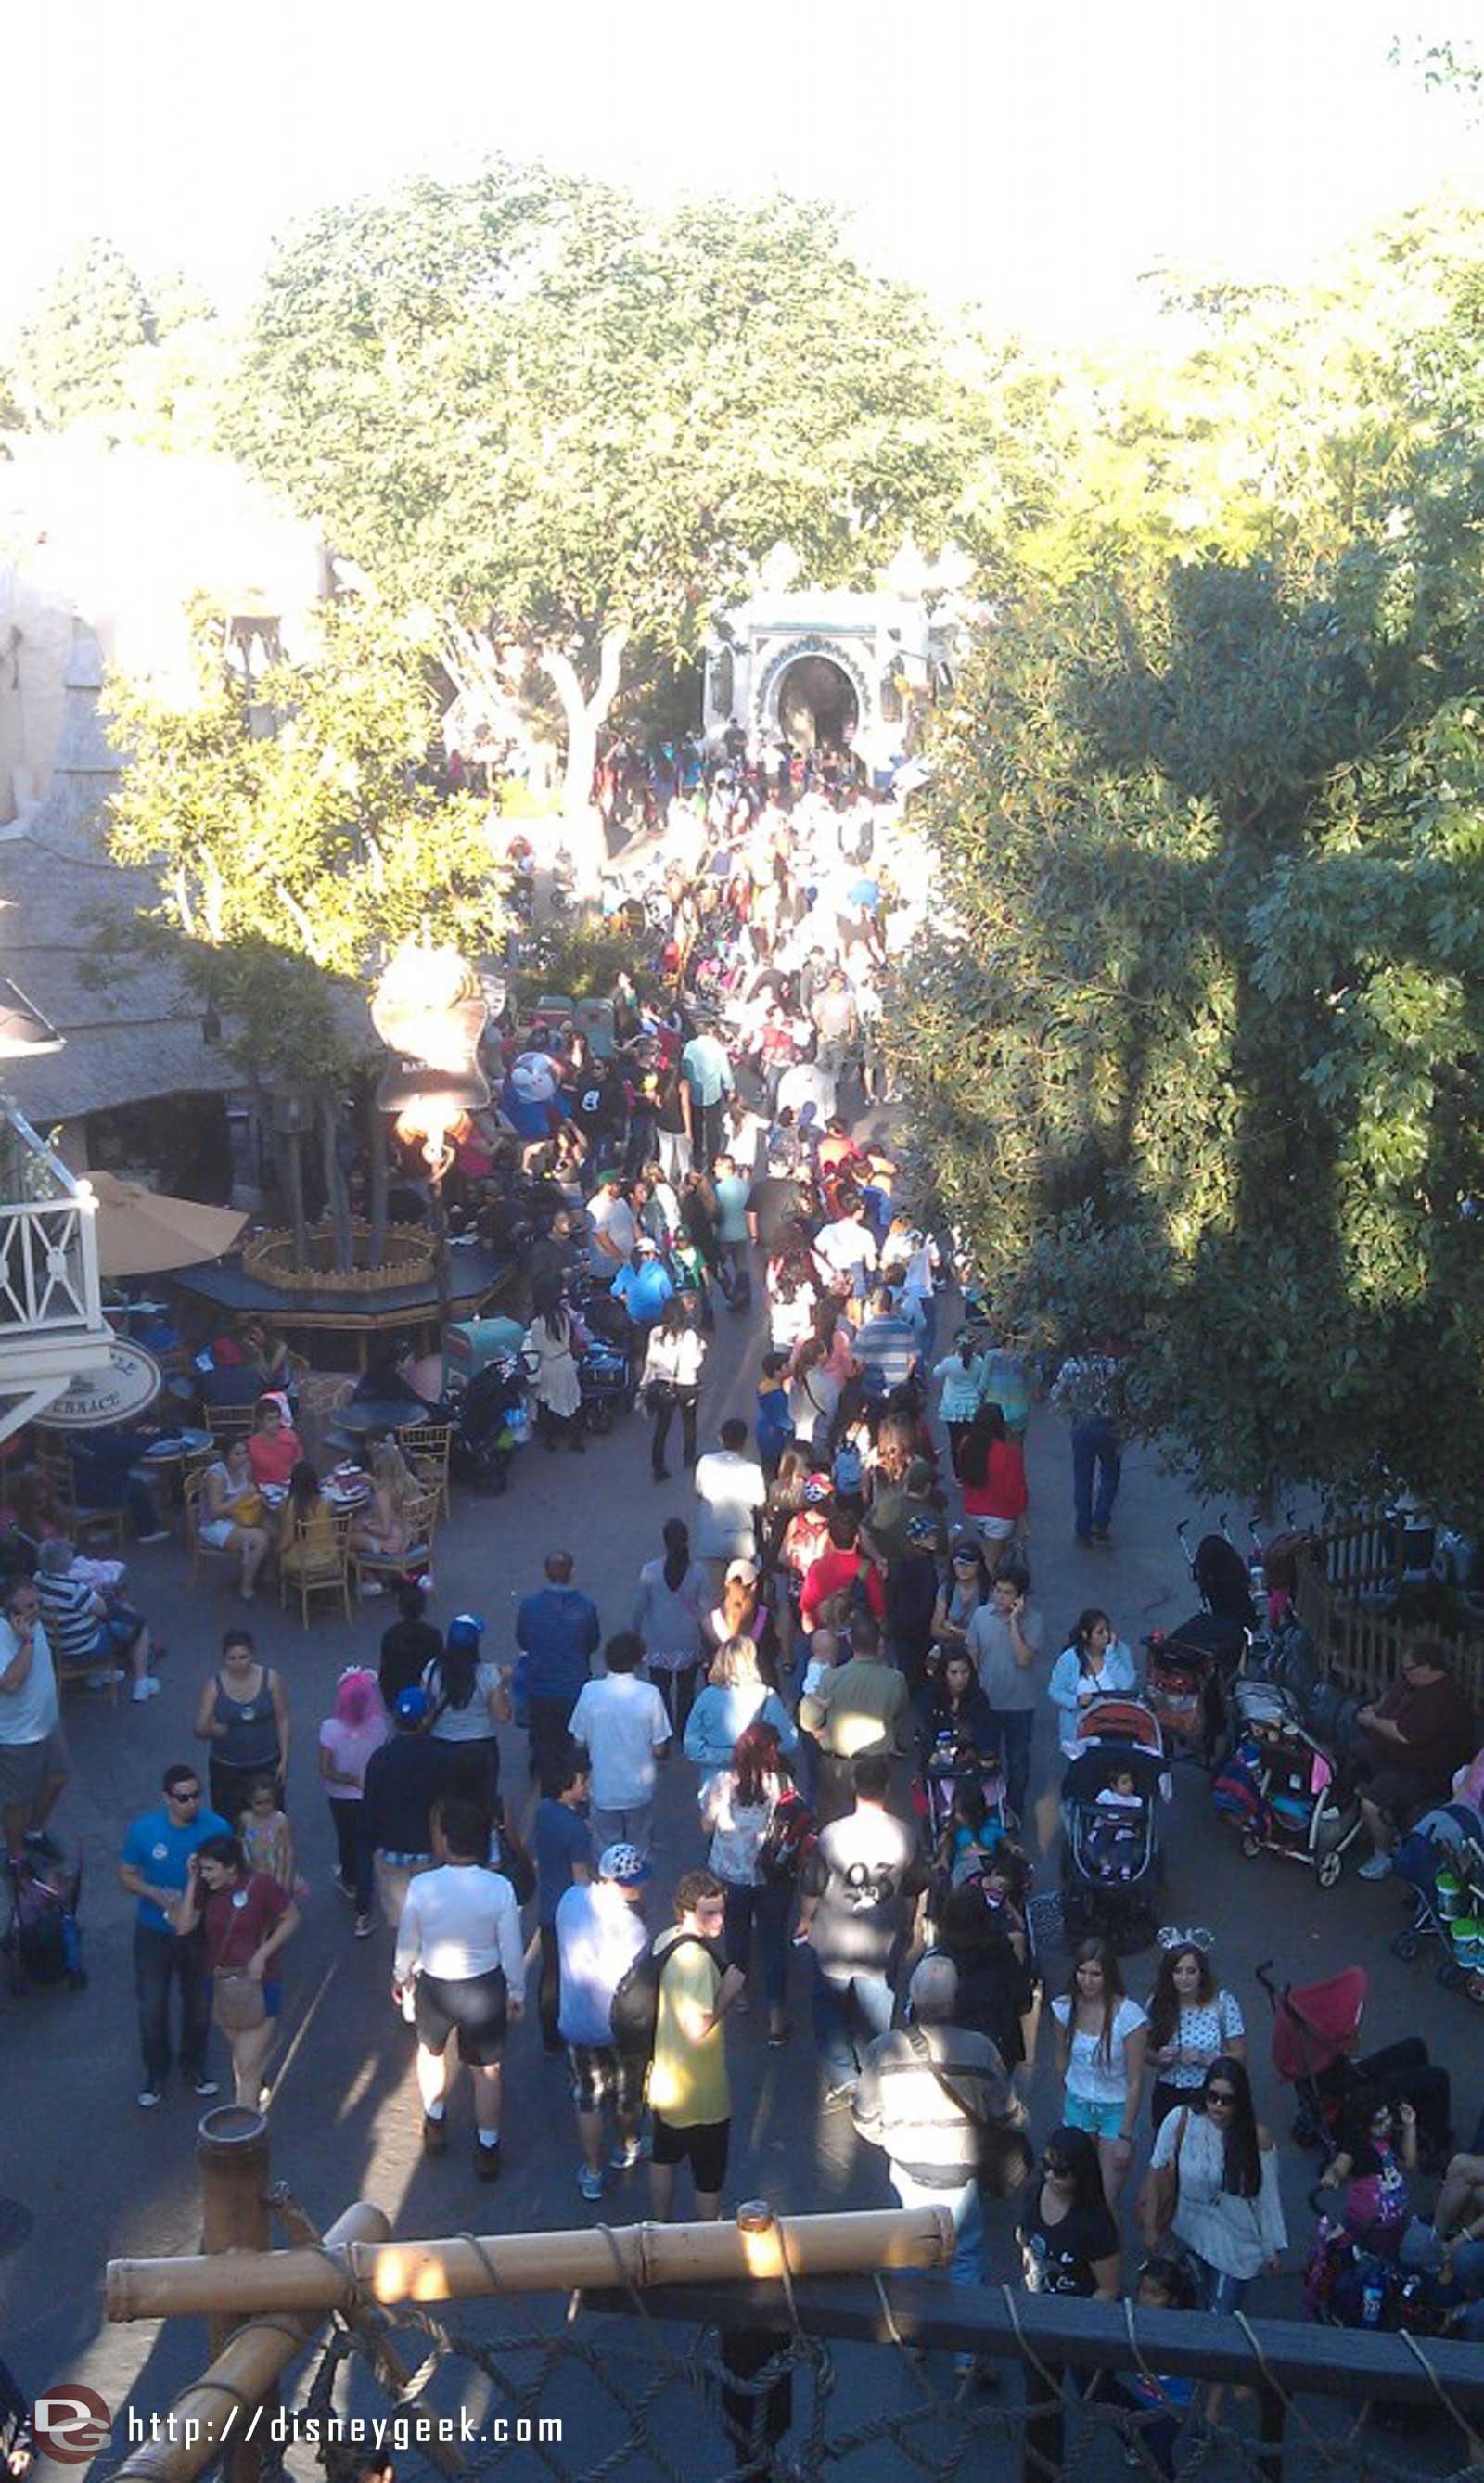 A look down at a busy Adventureland from Tarzan's Treehouse